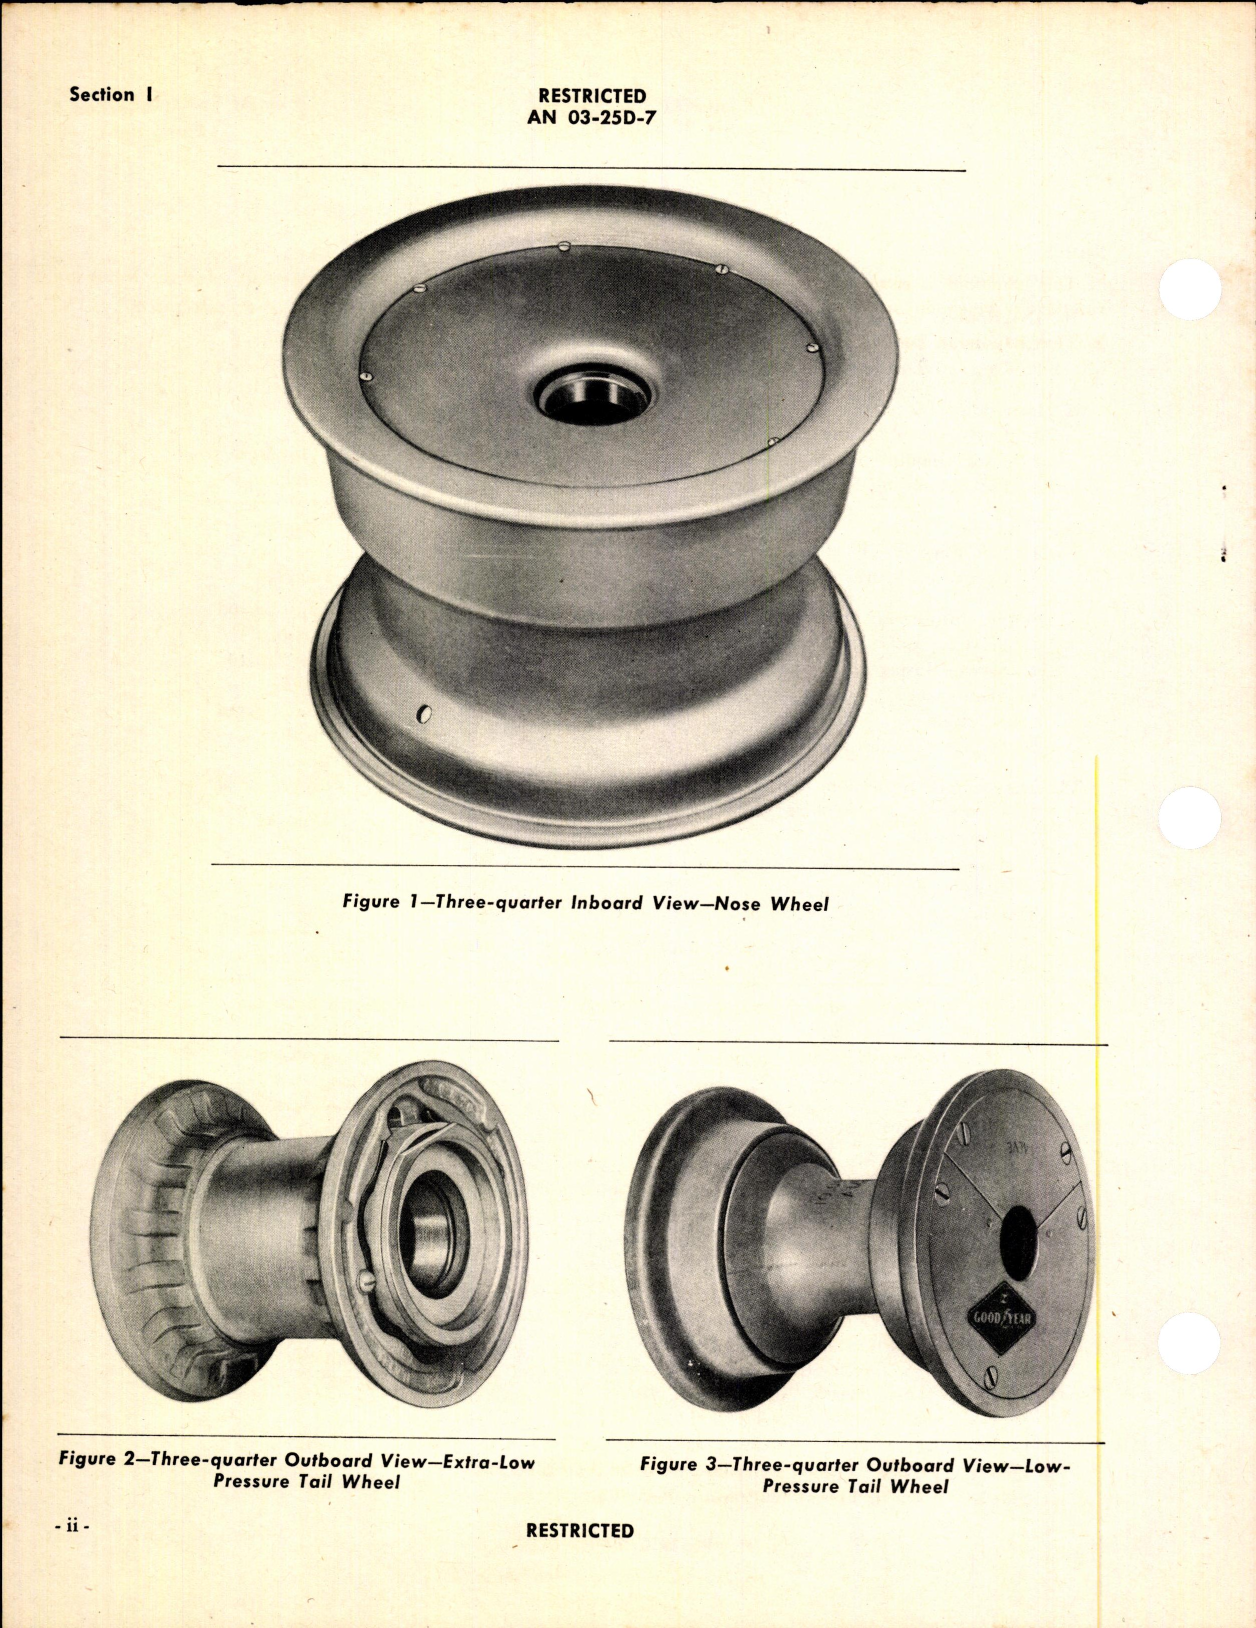 Sample page 4 from AirCorps Library document: Instructions with Parts Catalog for Nose & Tail Wheels